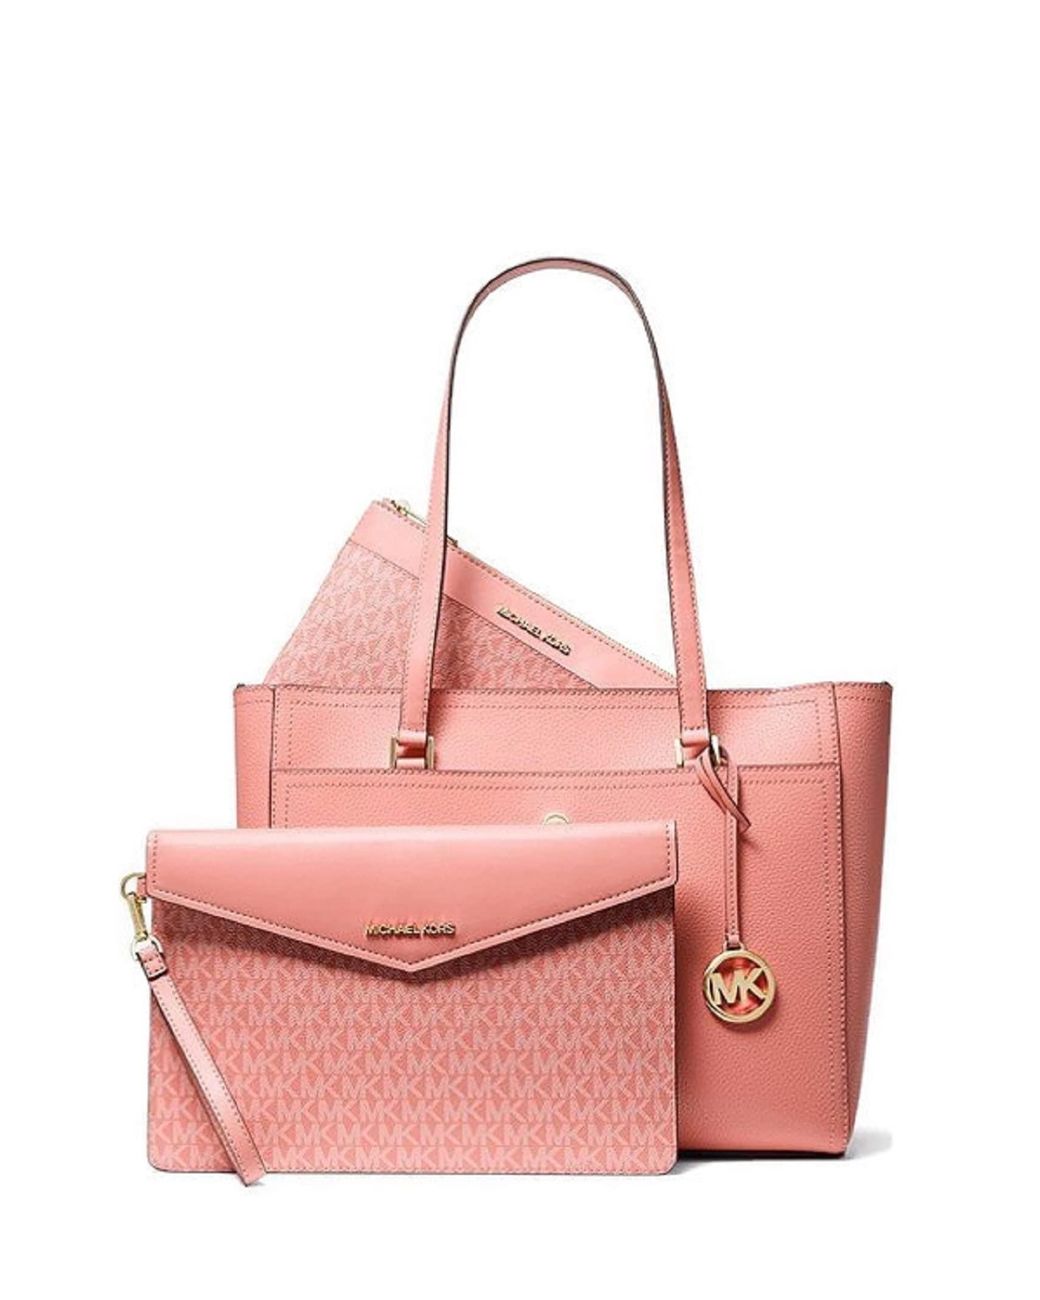 Michael Kors Maisie Large Pebbled Leather 3-in-1 Tote Bag in Pink | Lyst UK